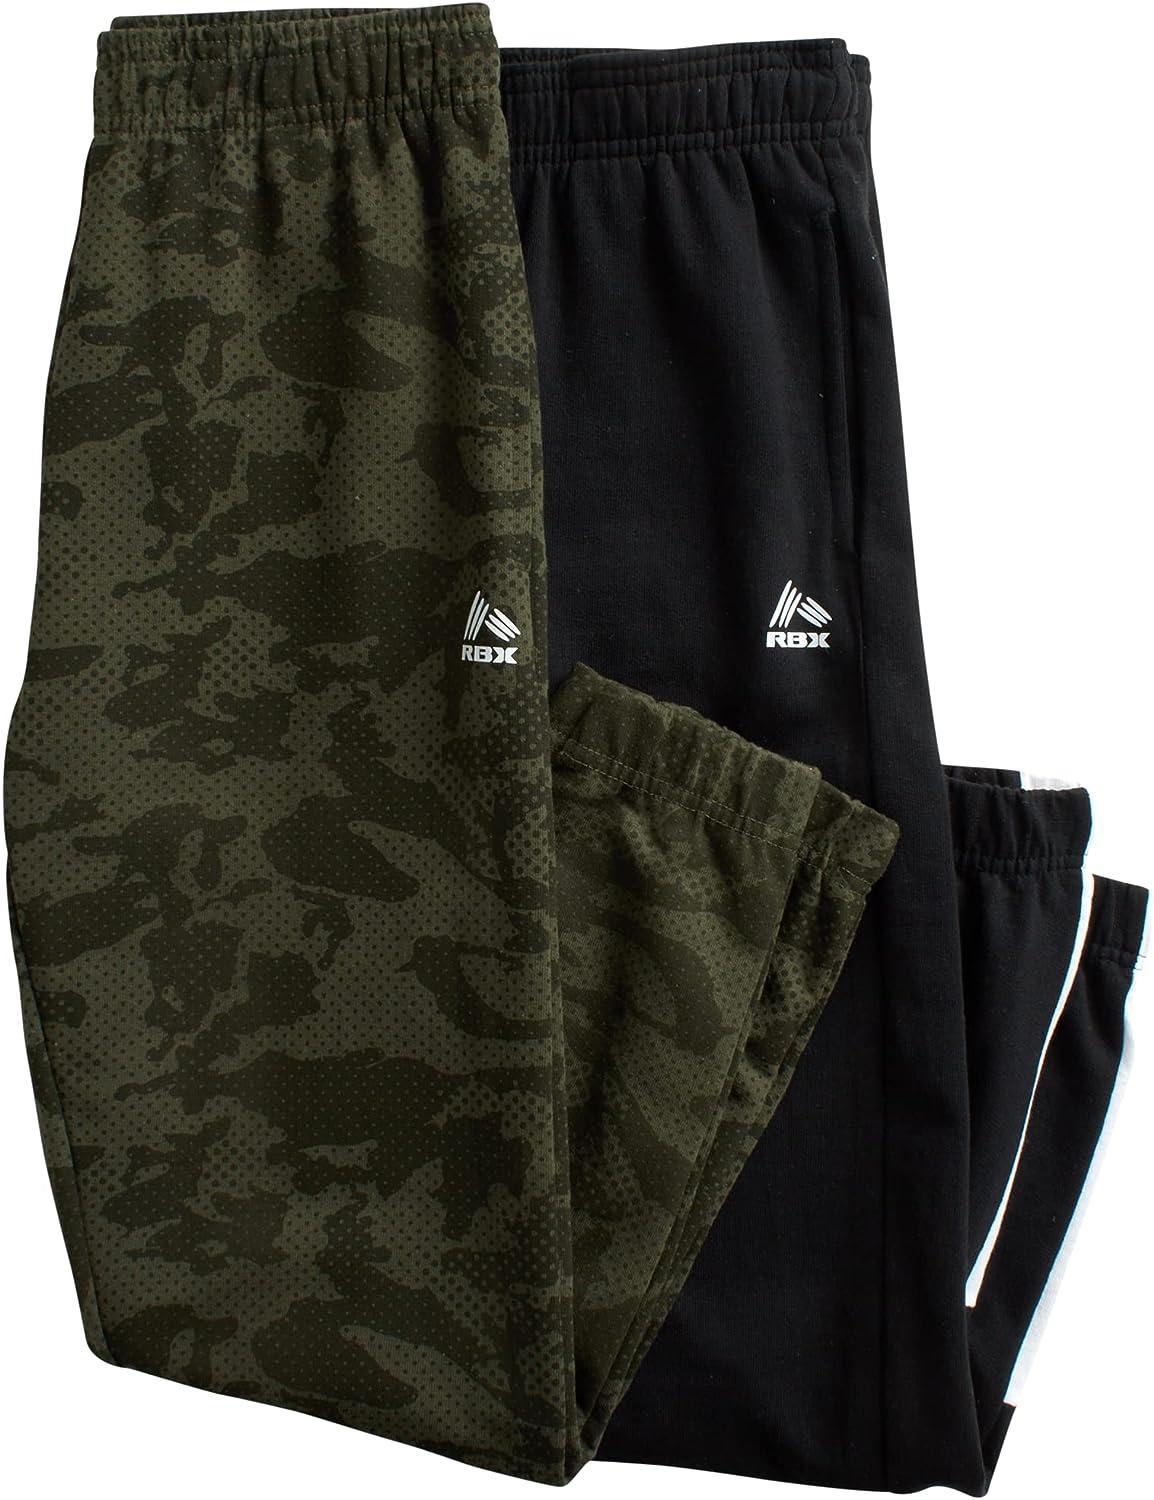 RBX Boys' Sweatpants - 4 Pack French Terry Active Jogger Pants (Size: 8-20)  Grey Camo/Green Camo 14-16